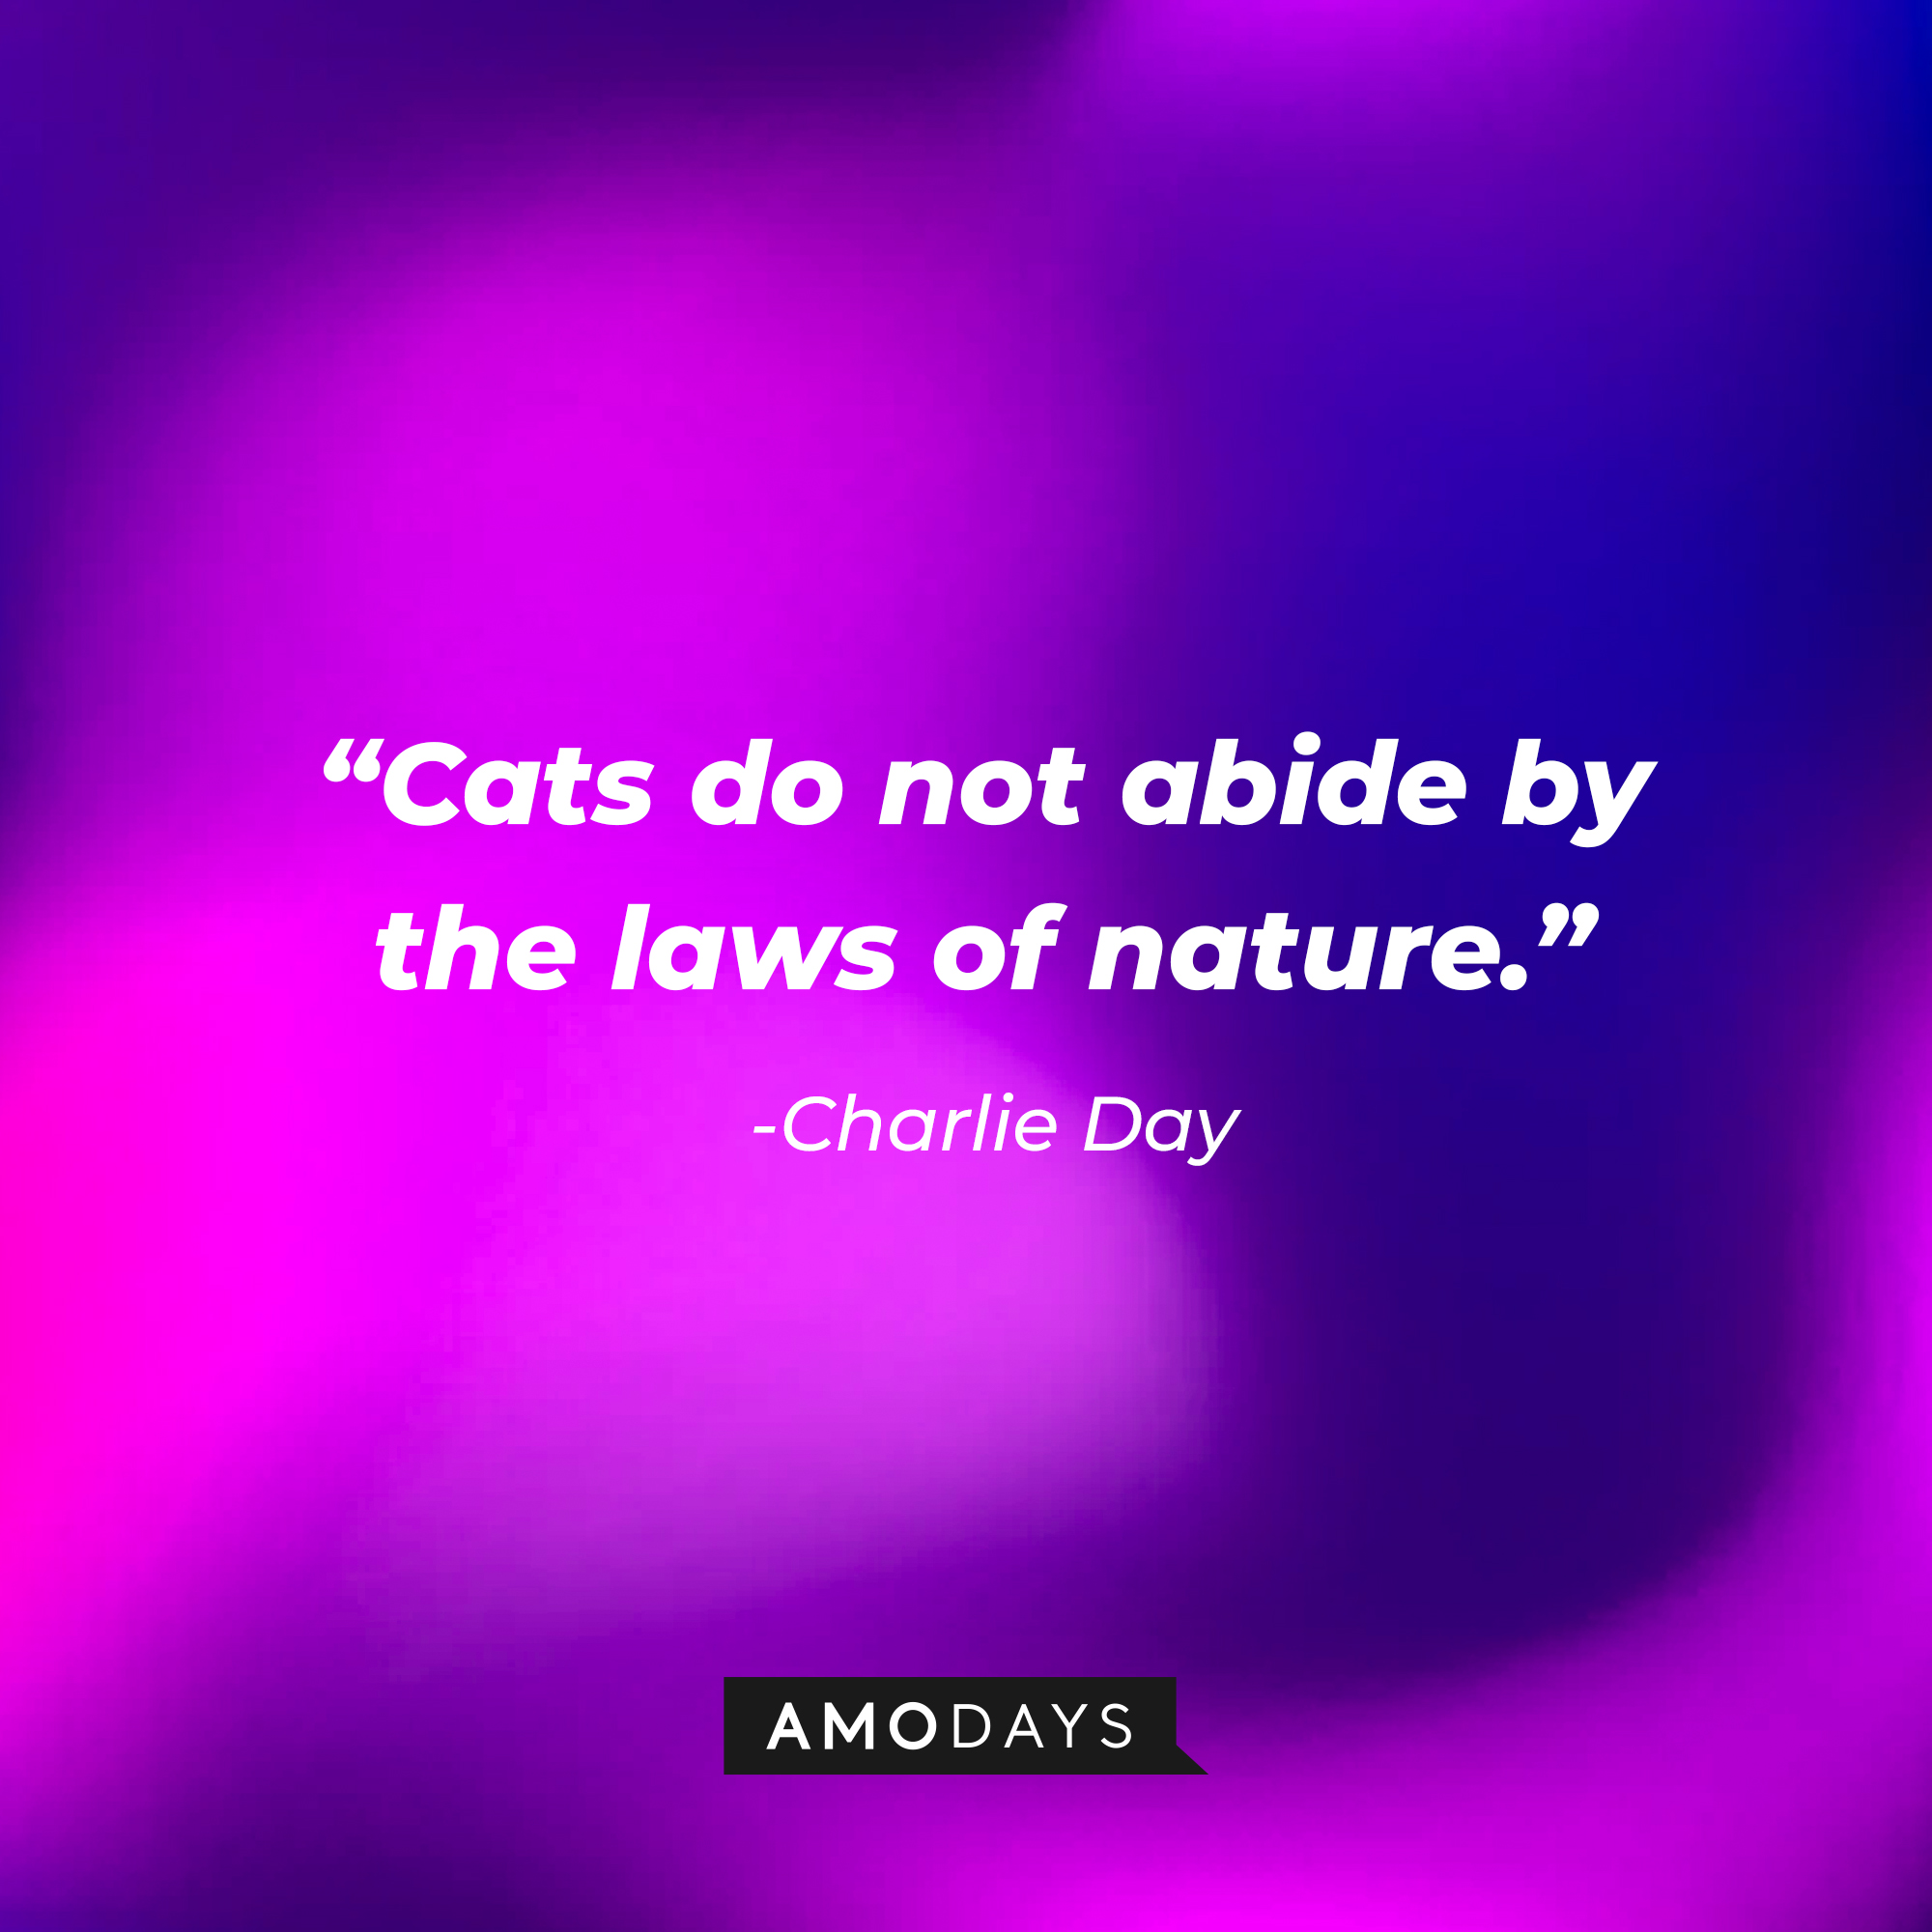 Charlie Day’s quote: “Cats do not abide by the laws of nature.” | Source: AmoDays